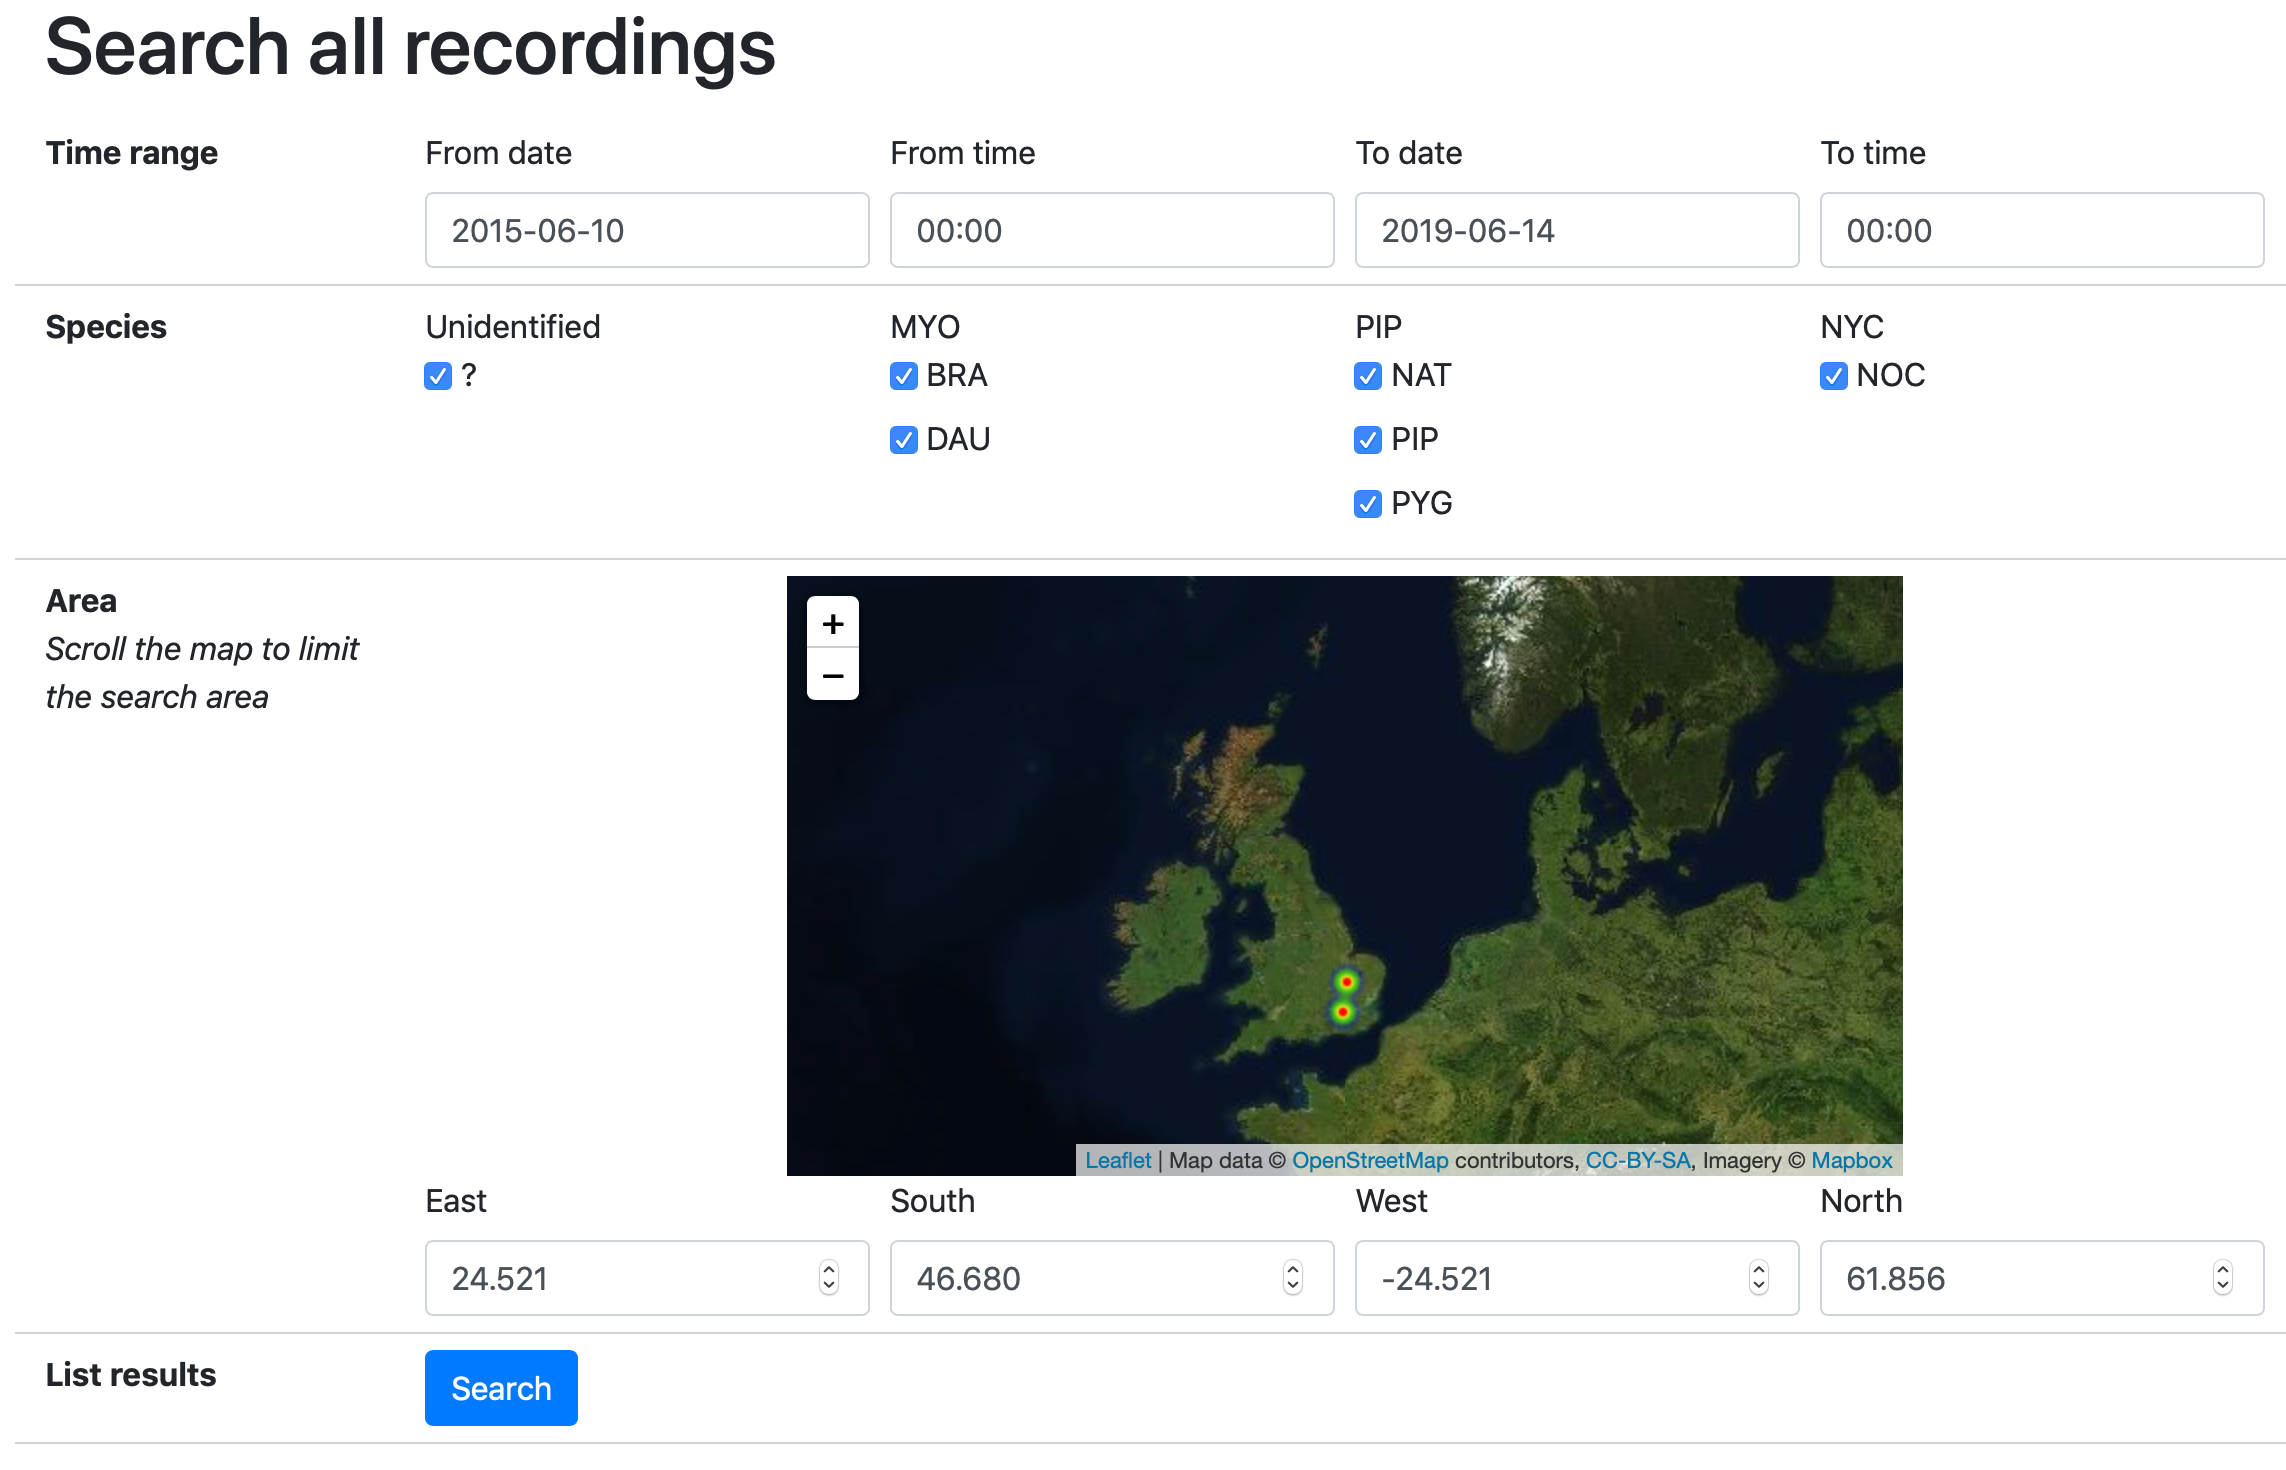 The search page contains a scrollable map and various controls to filter your search by